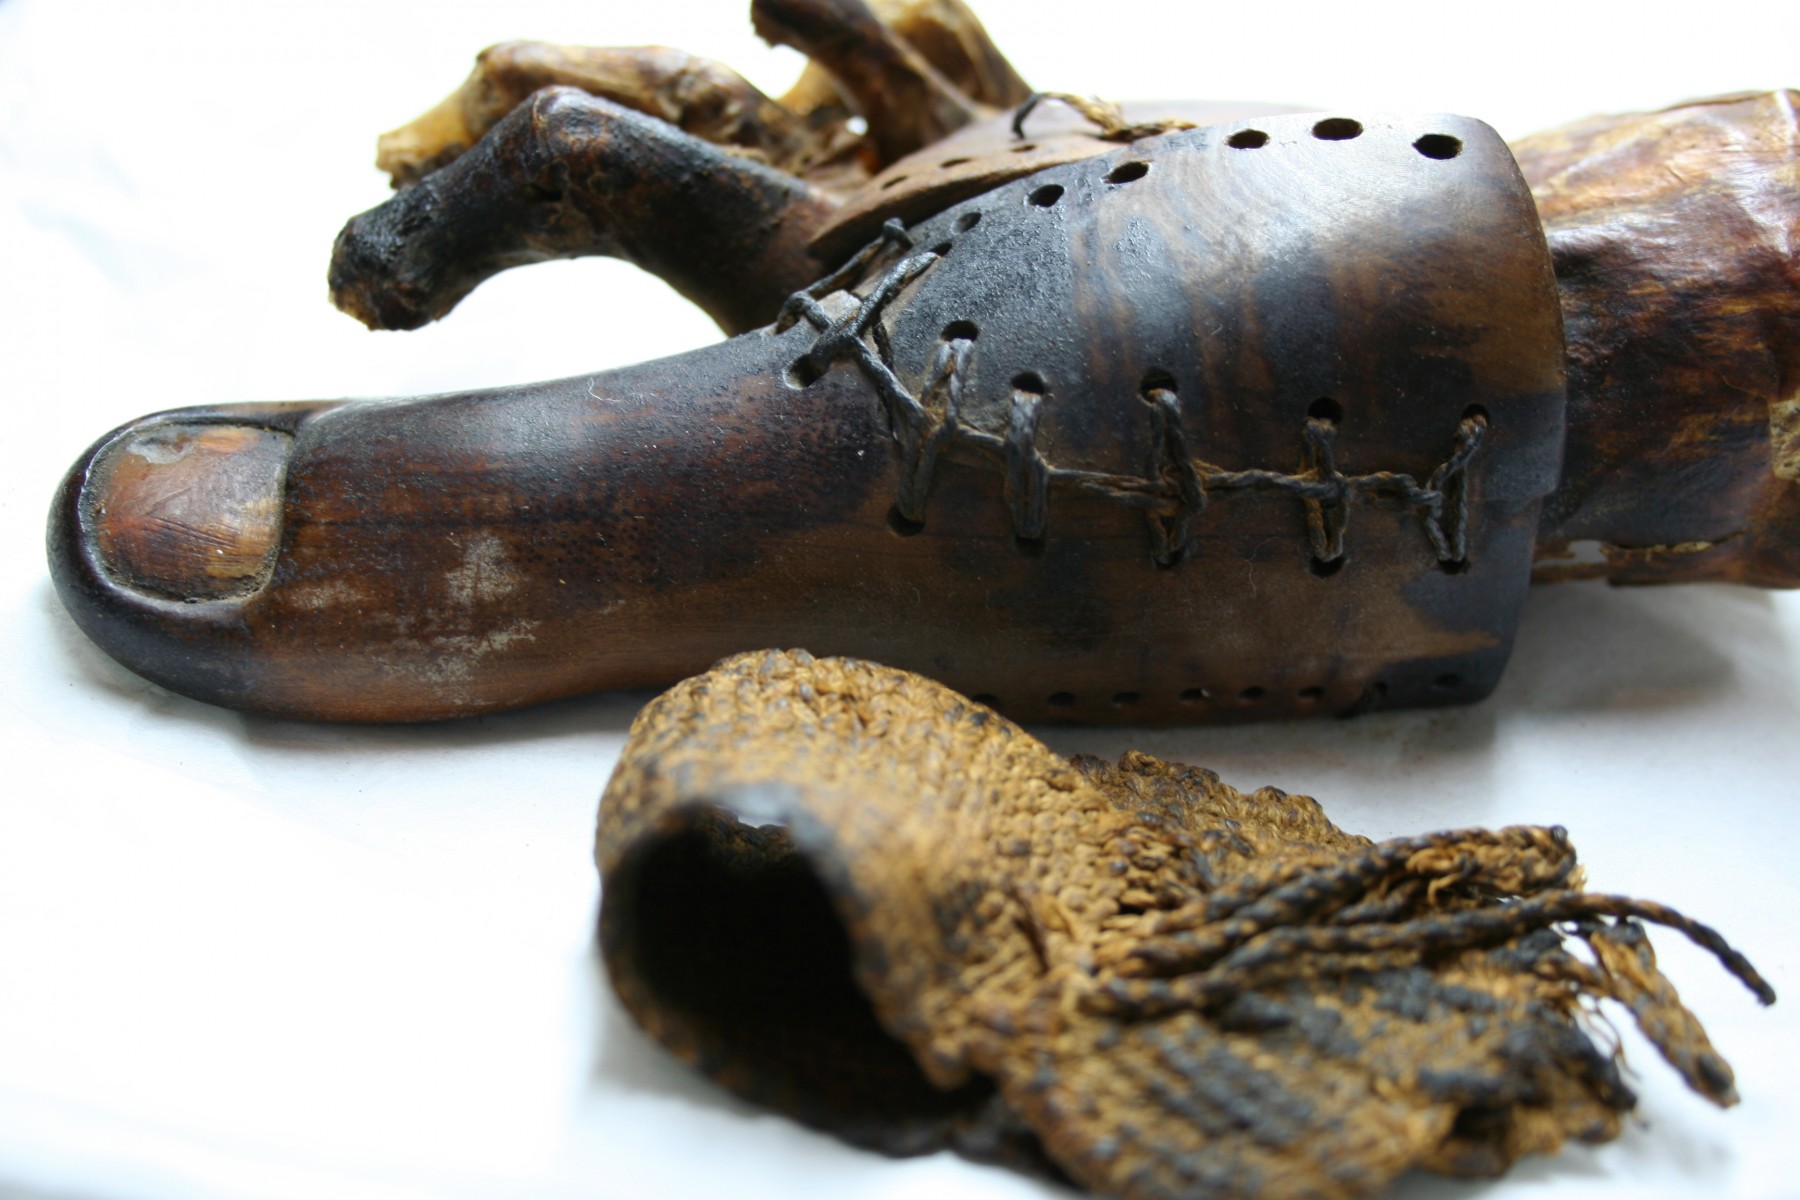 Egyptian toes likely to be the world's oldest prosthetics